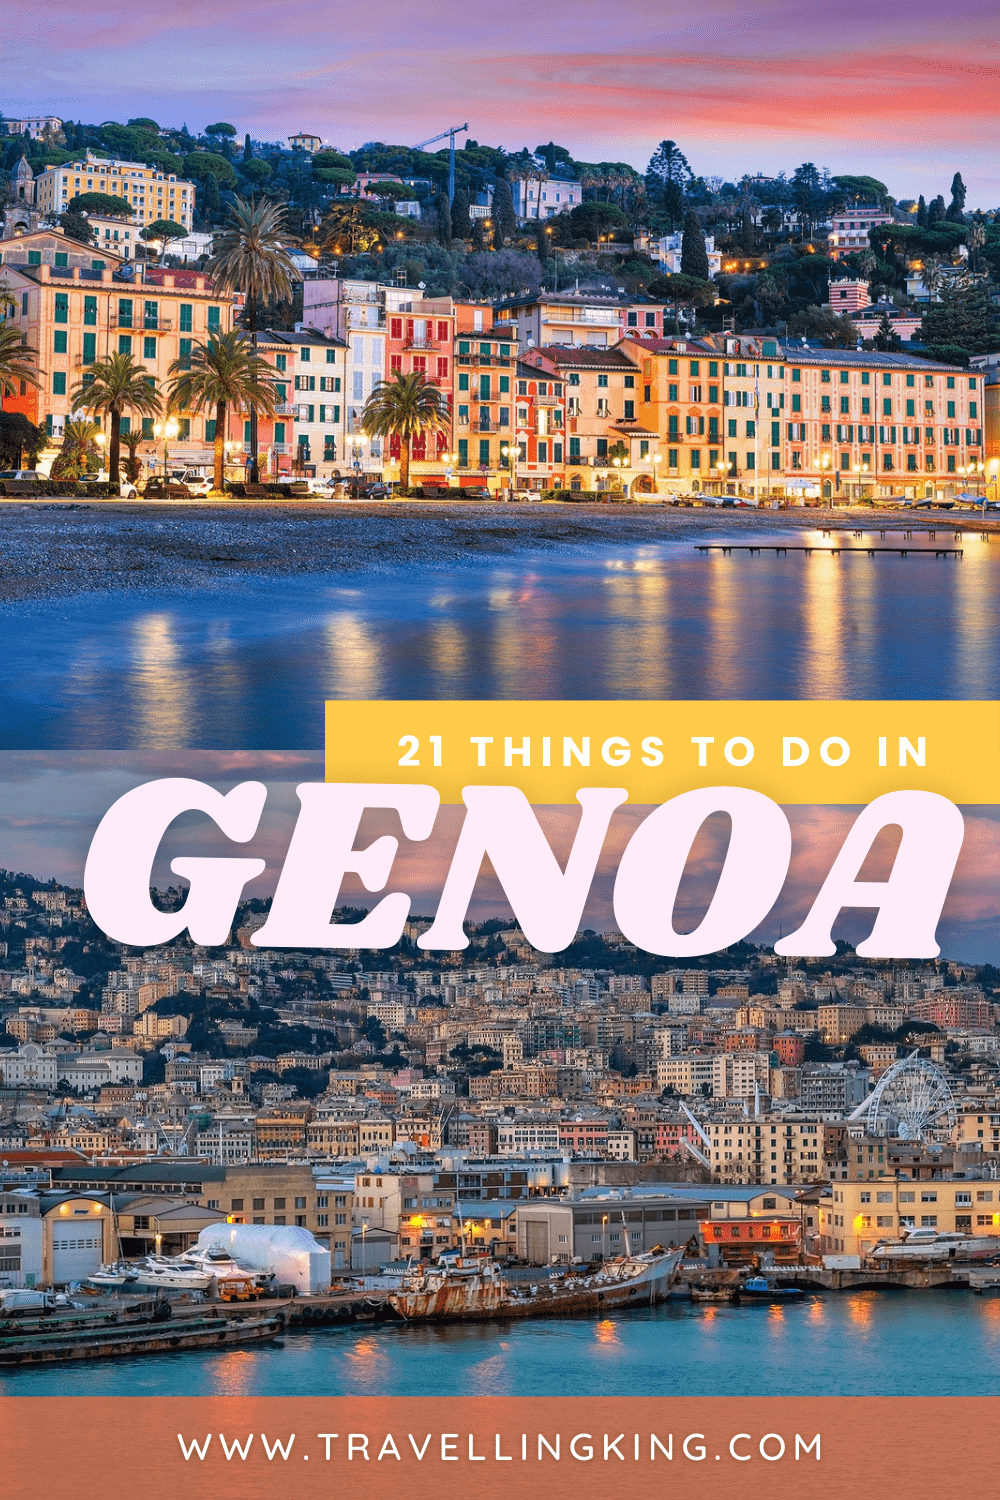 21 Things To Do in Genoa